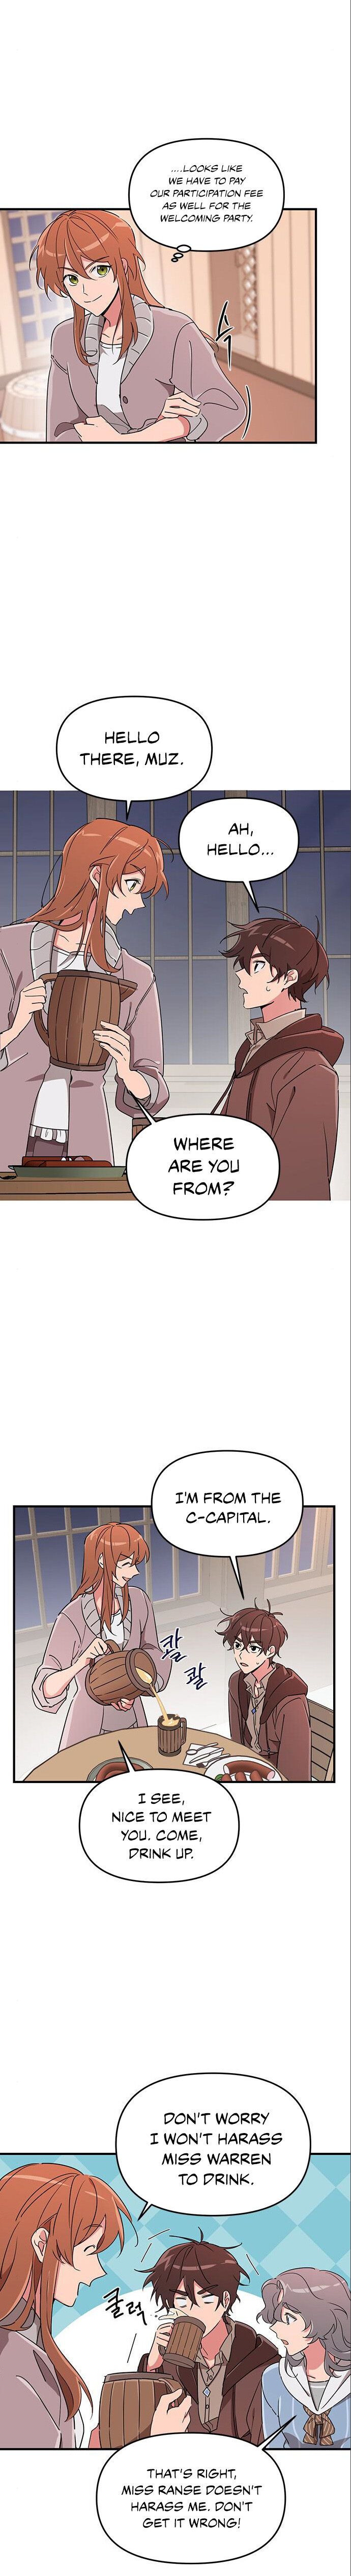 Single Wizard’s Dormitory Apartment Chapter 5 - Page 4